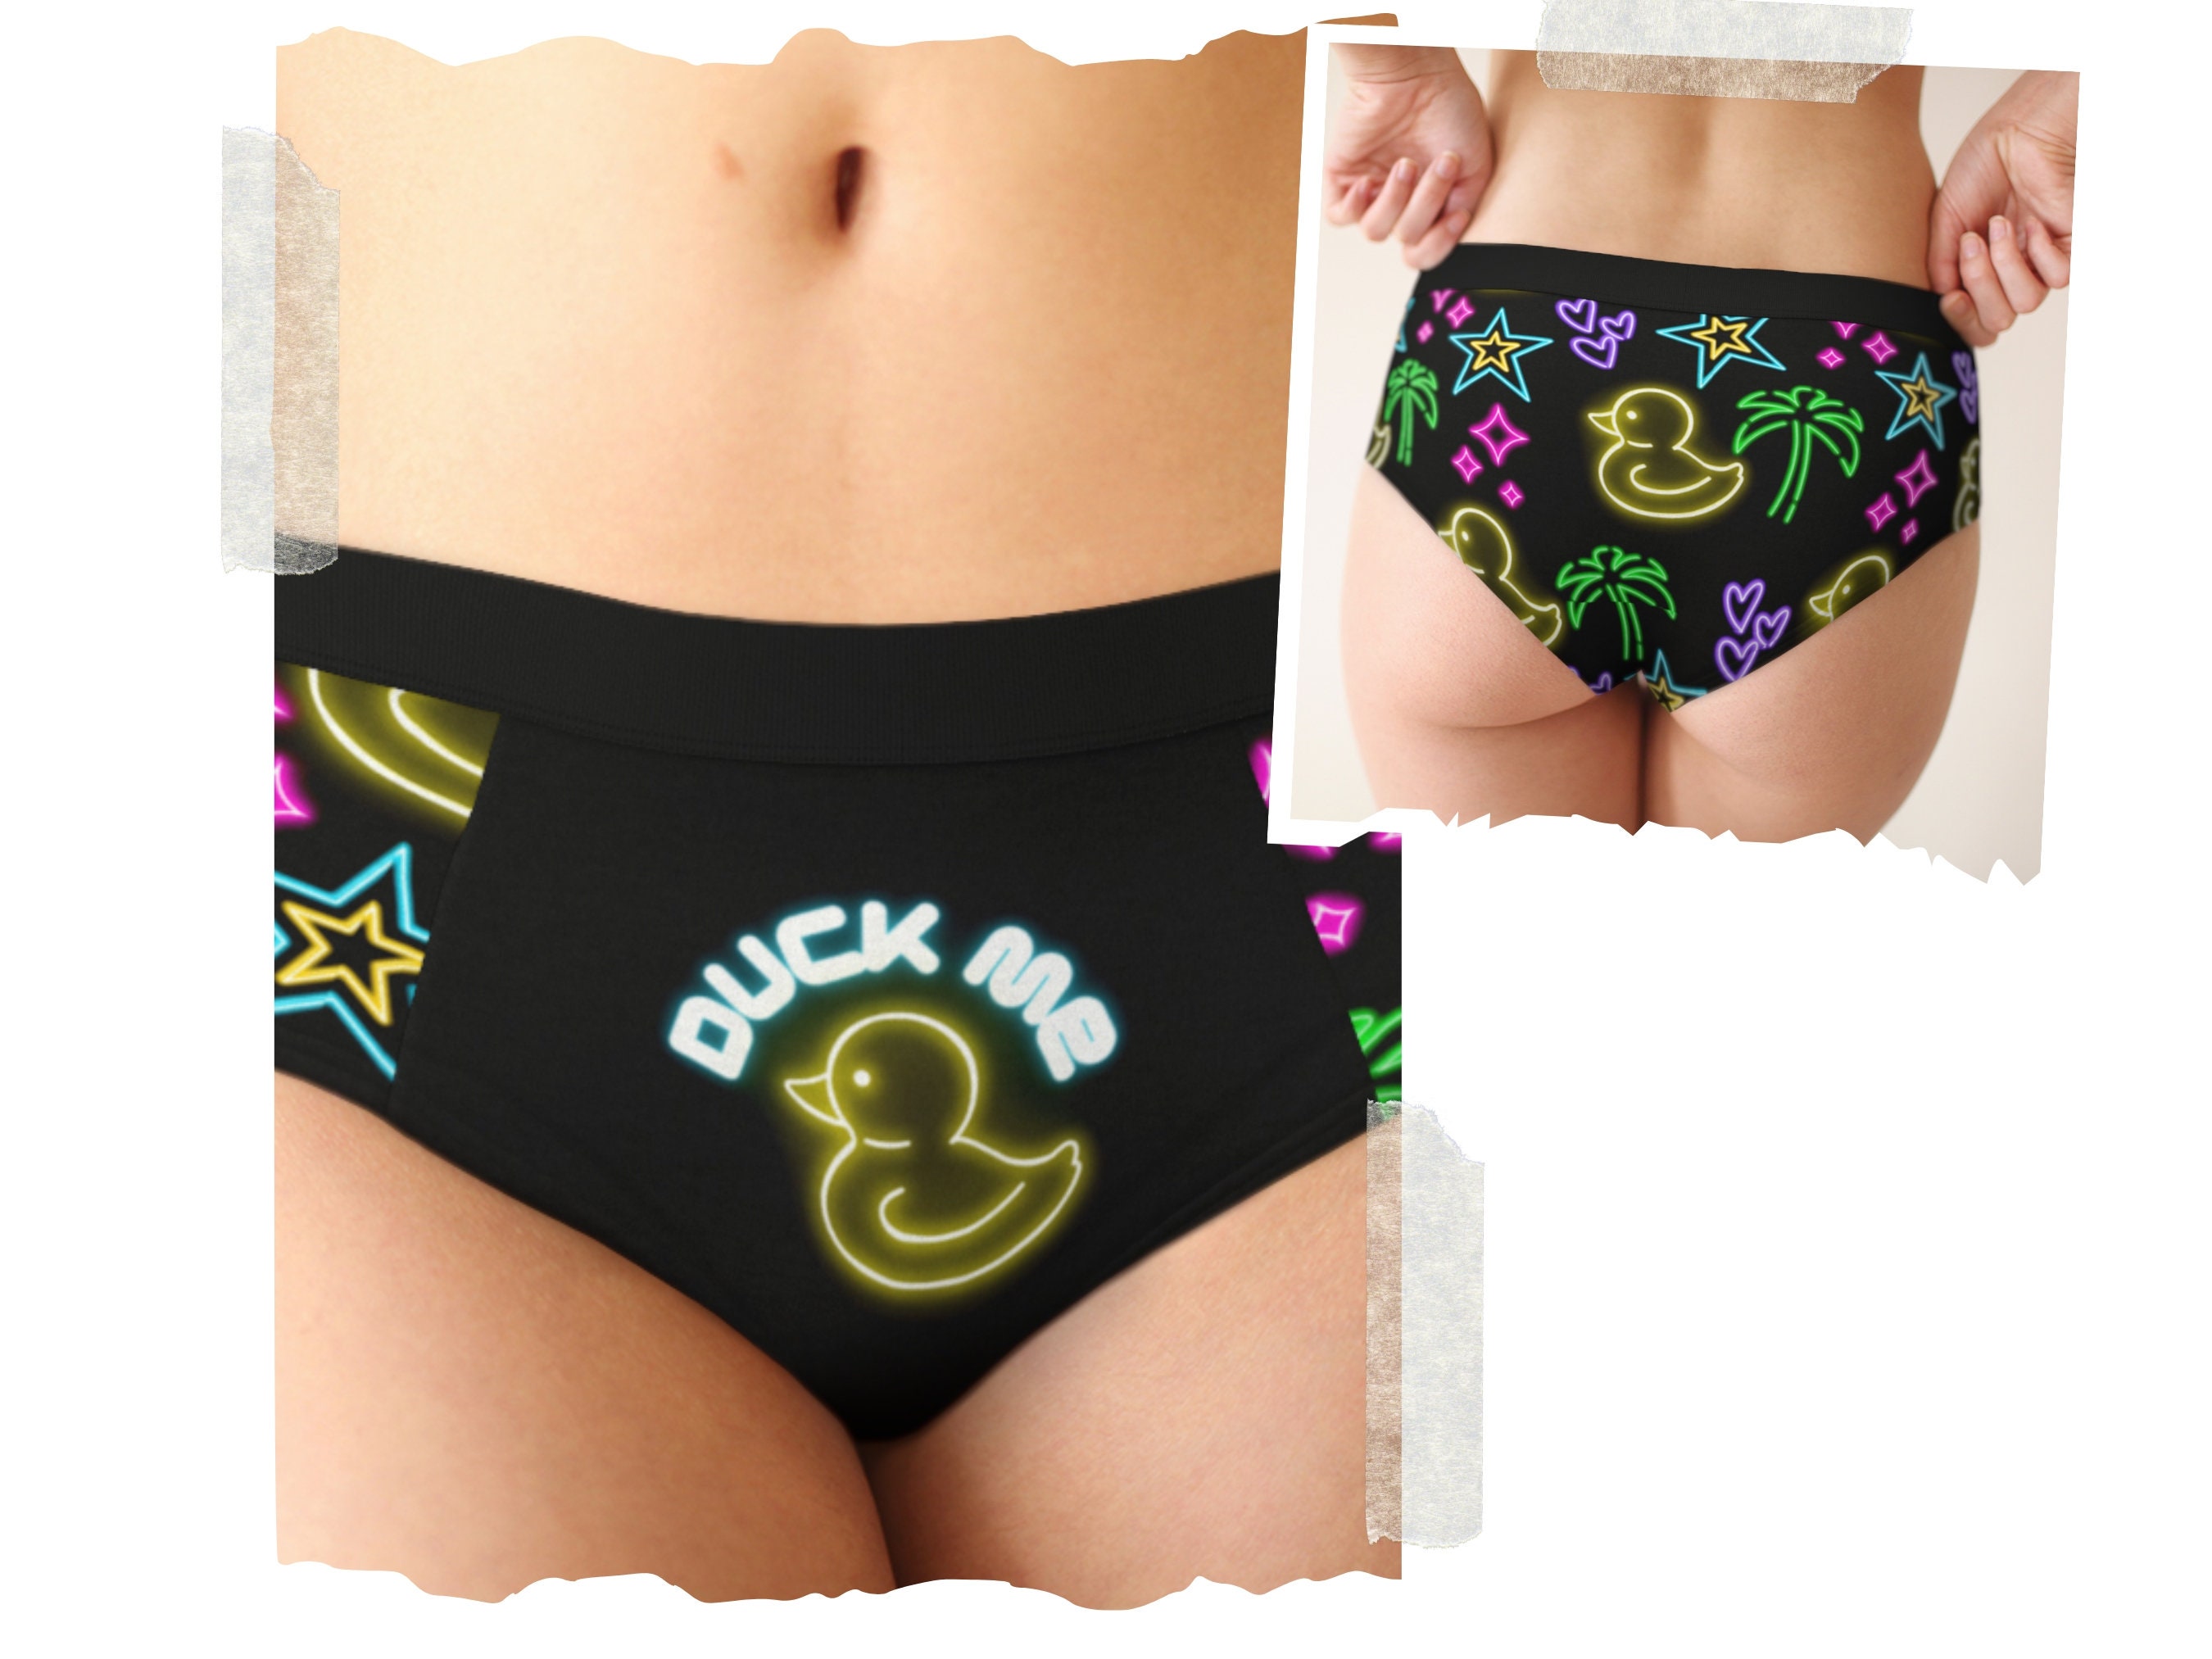 Duck Me DDLG Cheeky Sexy Underwear, Discreet Little Space Sexy Panties,  BDSM Discreet Kawaii Lingerie, MDLG Fetish Wear, Submissive Clothing -   Sweden